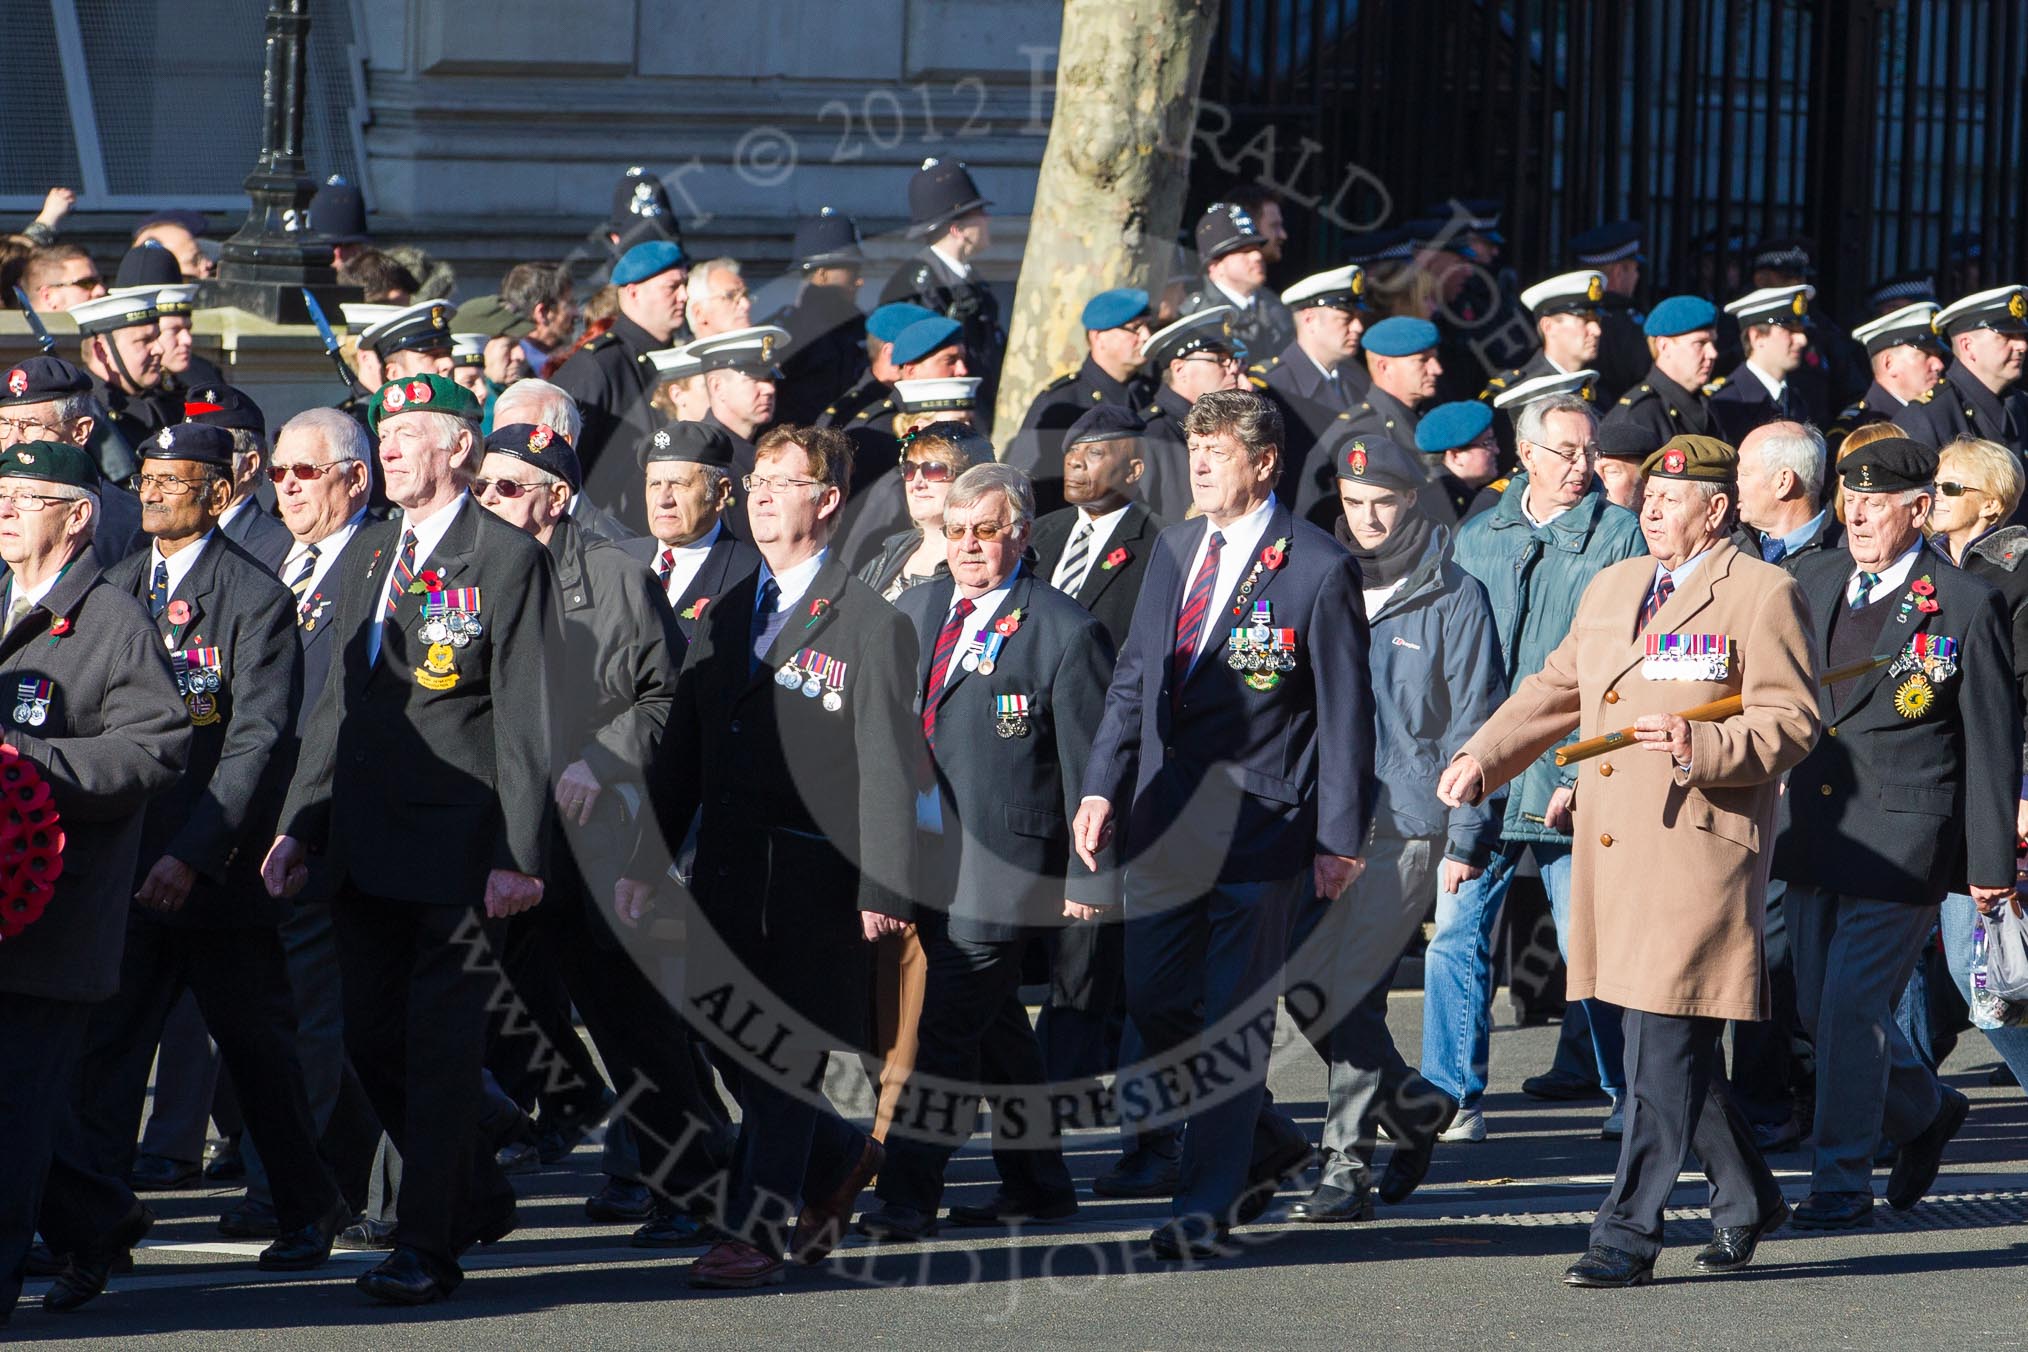 Remembrance Sunday 2012 Cenotaph March Past: Group F2 - Aden Veterans Association..
Whitehall, Cenotaph,
London SW1,

United Kingdom,
on 11 November 2012 at 11:45, image #394